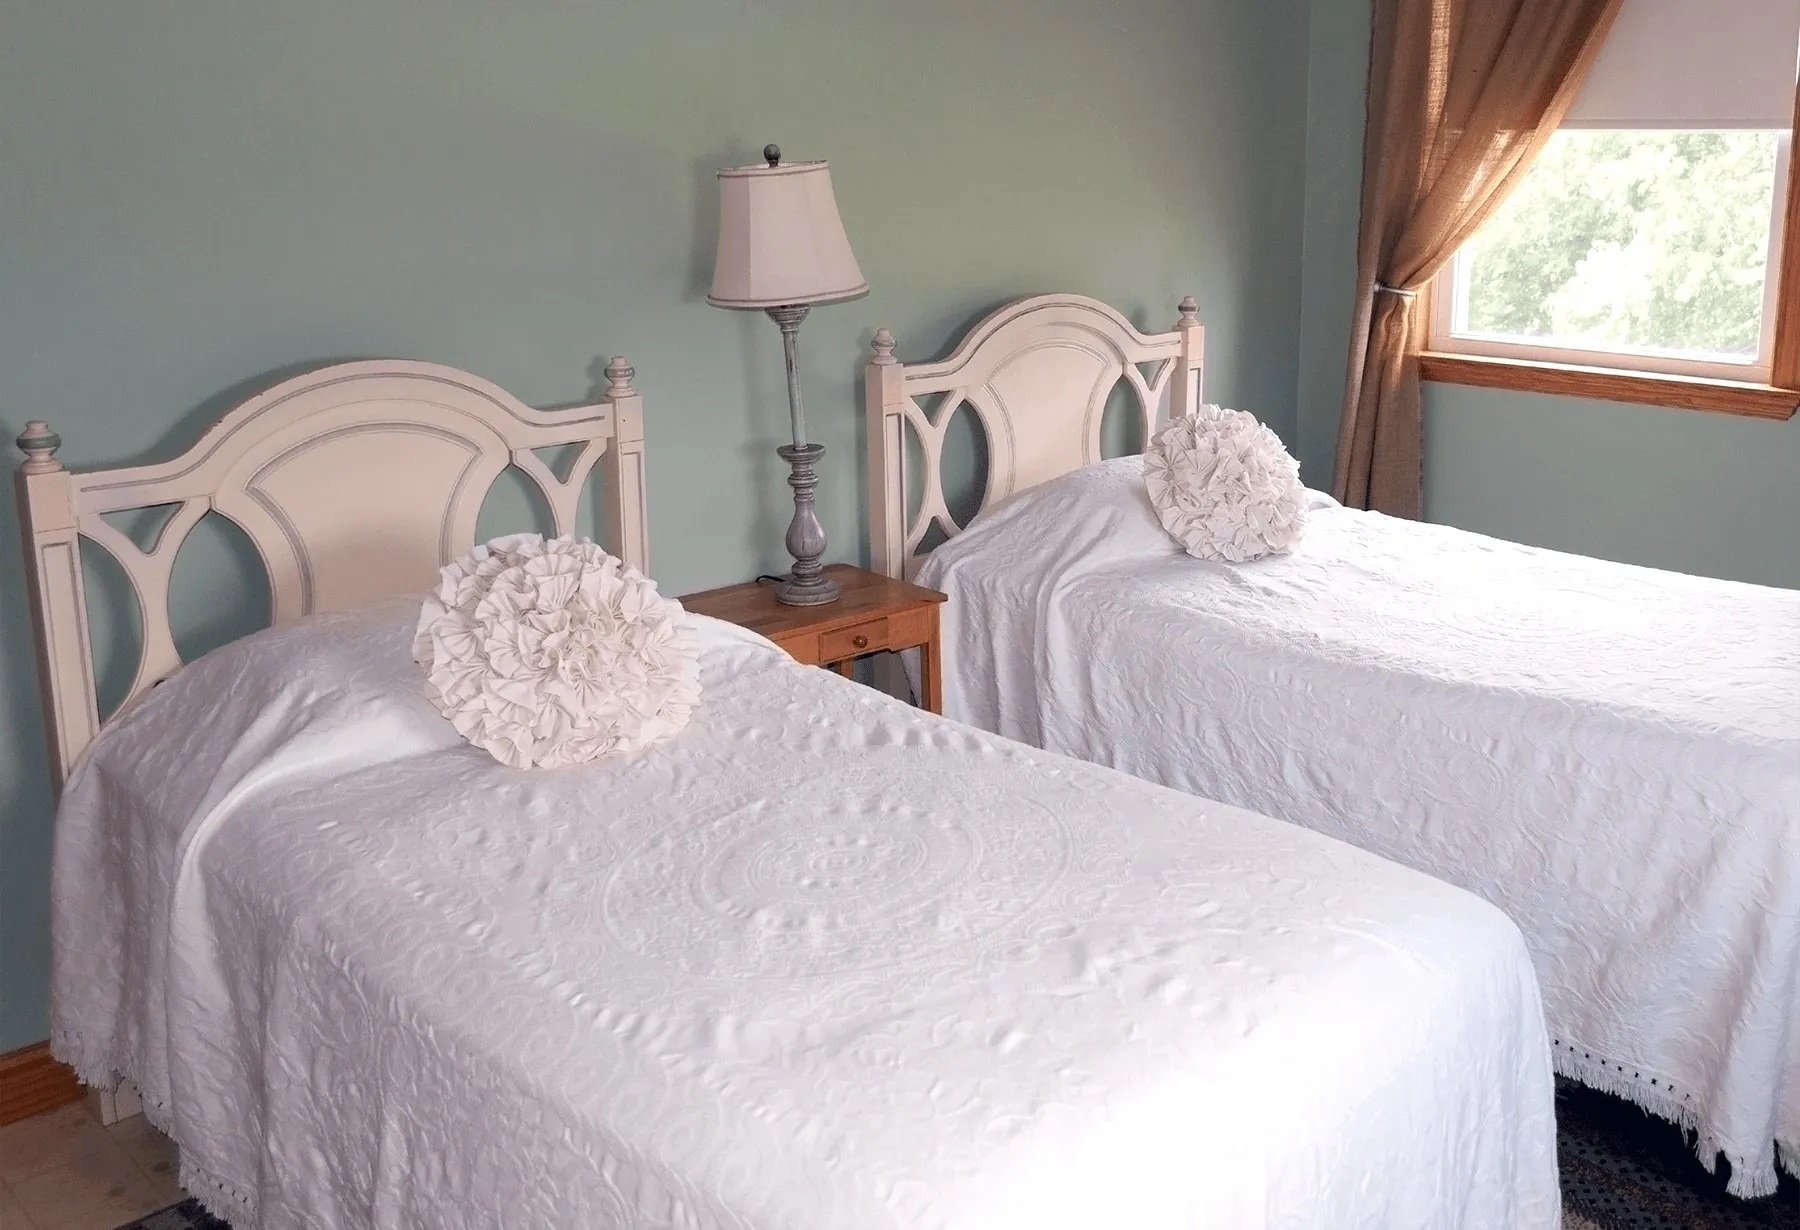 Two twin beds in a bedroom with white sheets and pillows.